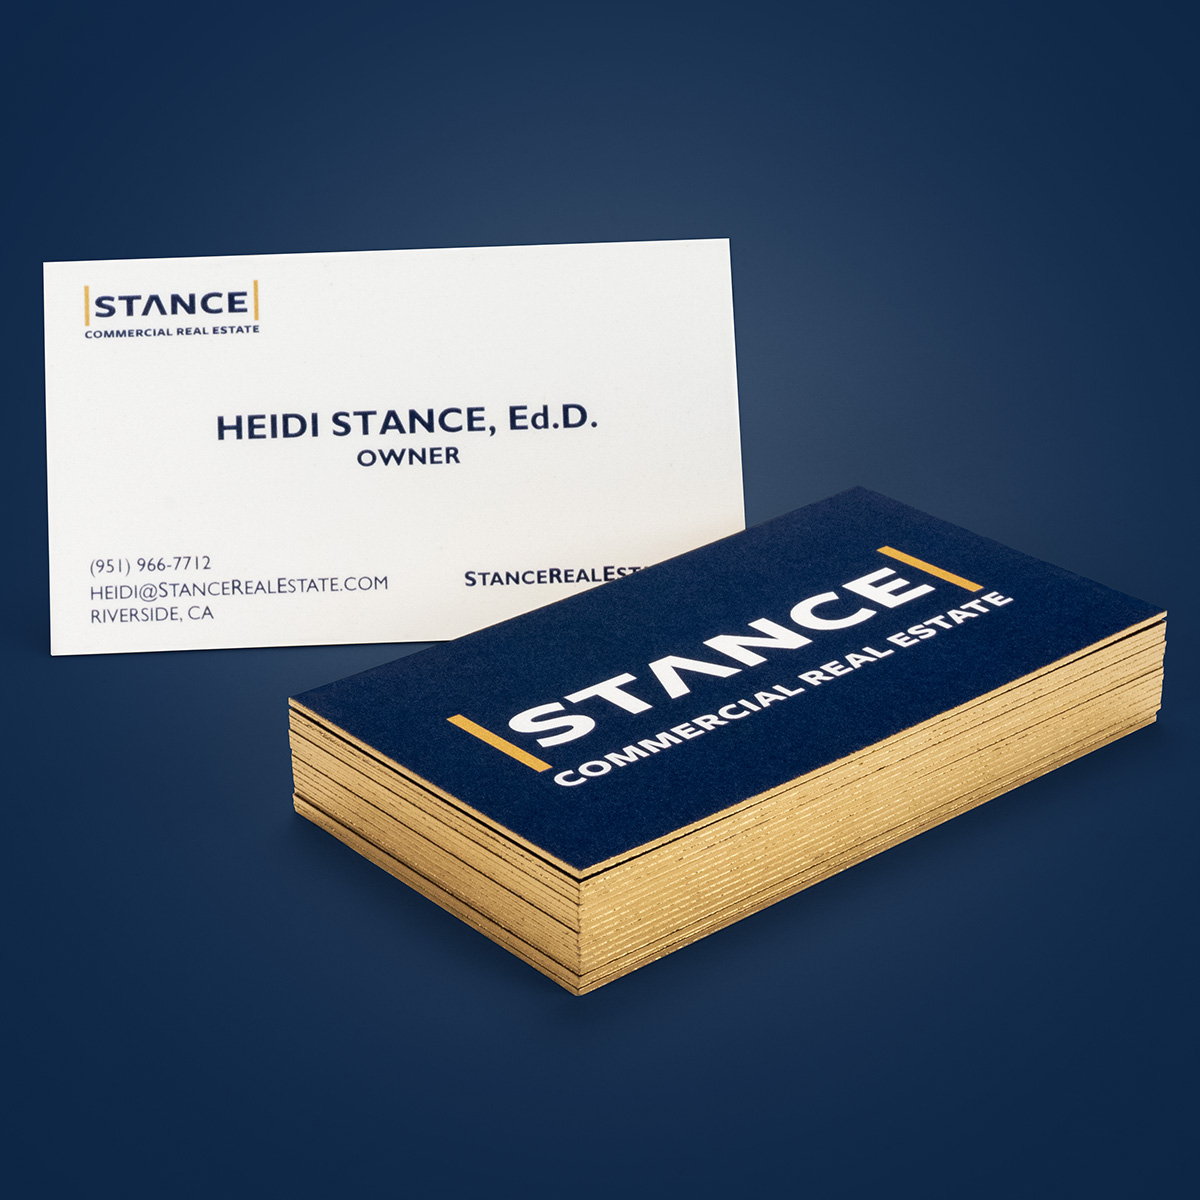 Stance Commercial Real Estate Business Cards with Metallic Gold Gilded Edges